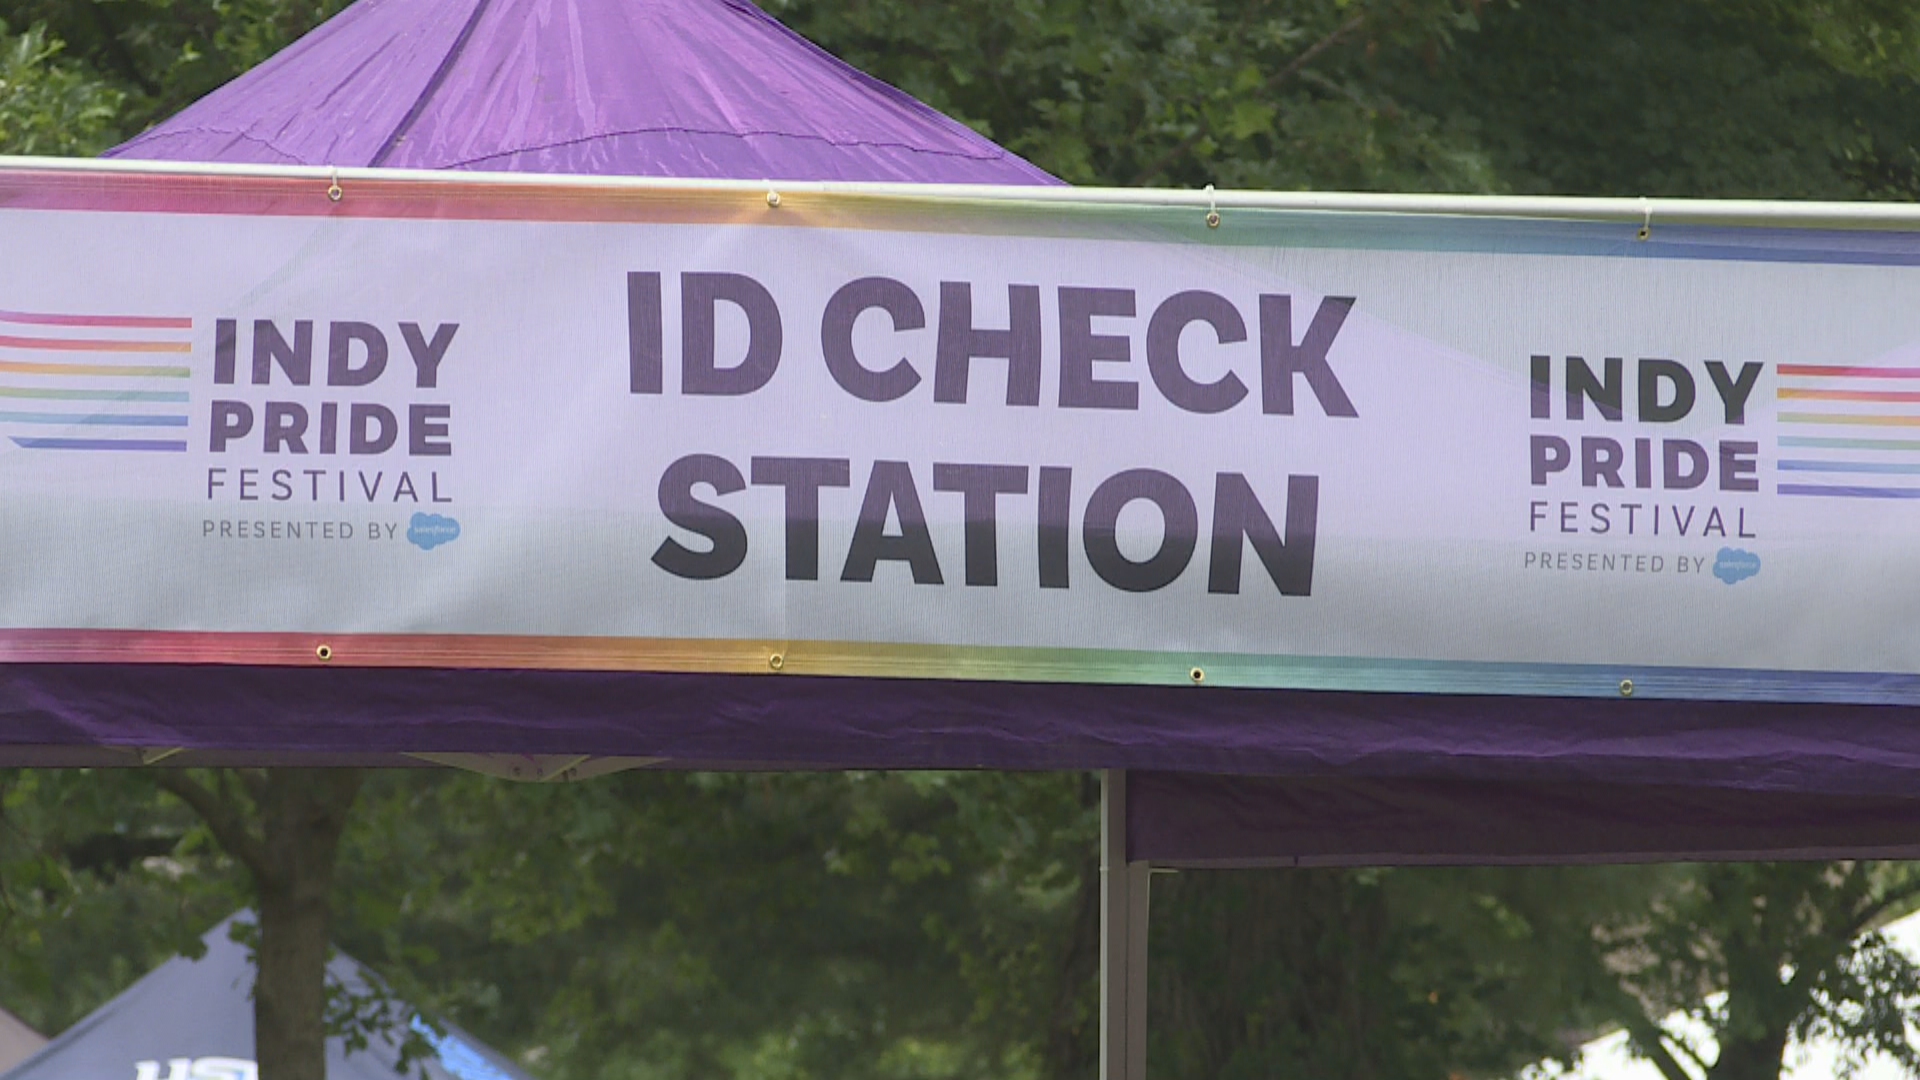 Rules, safety tips offered for Indy Pride parade, festival